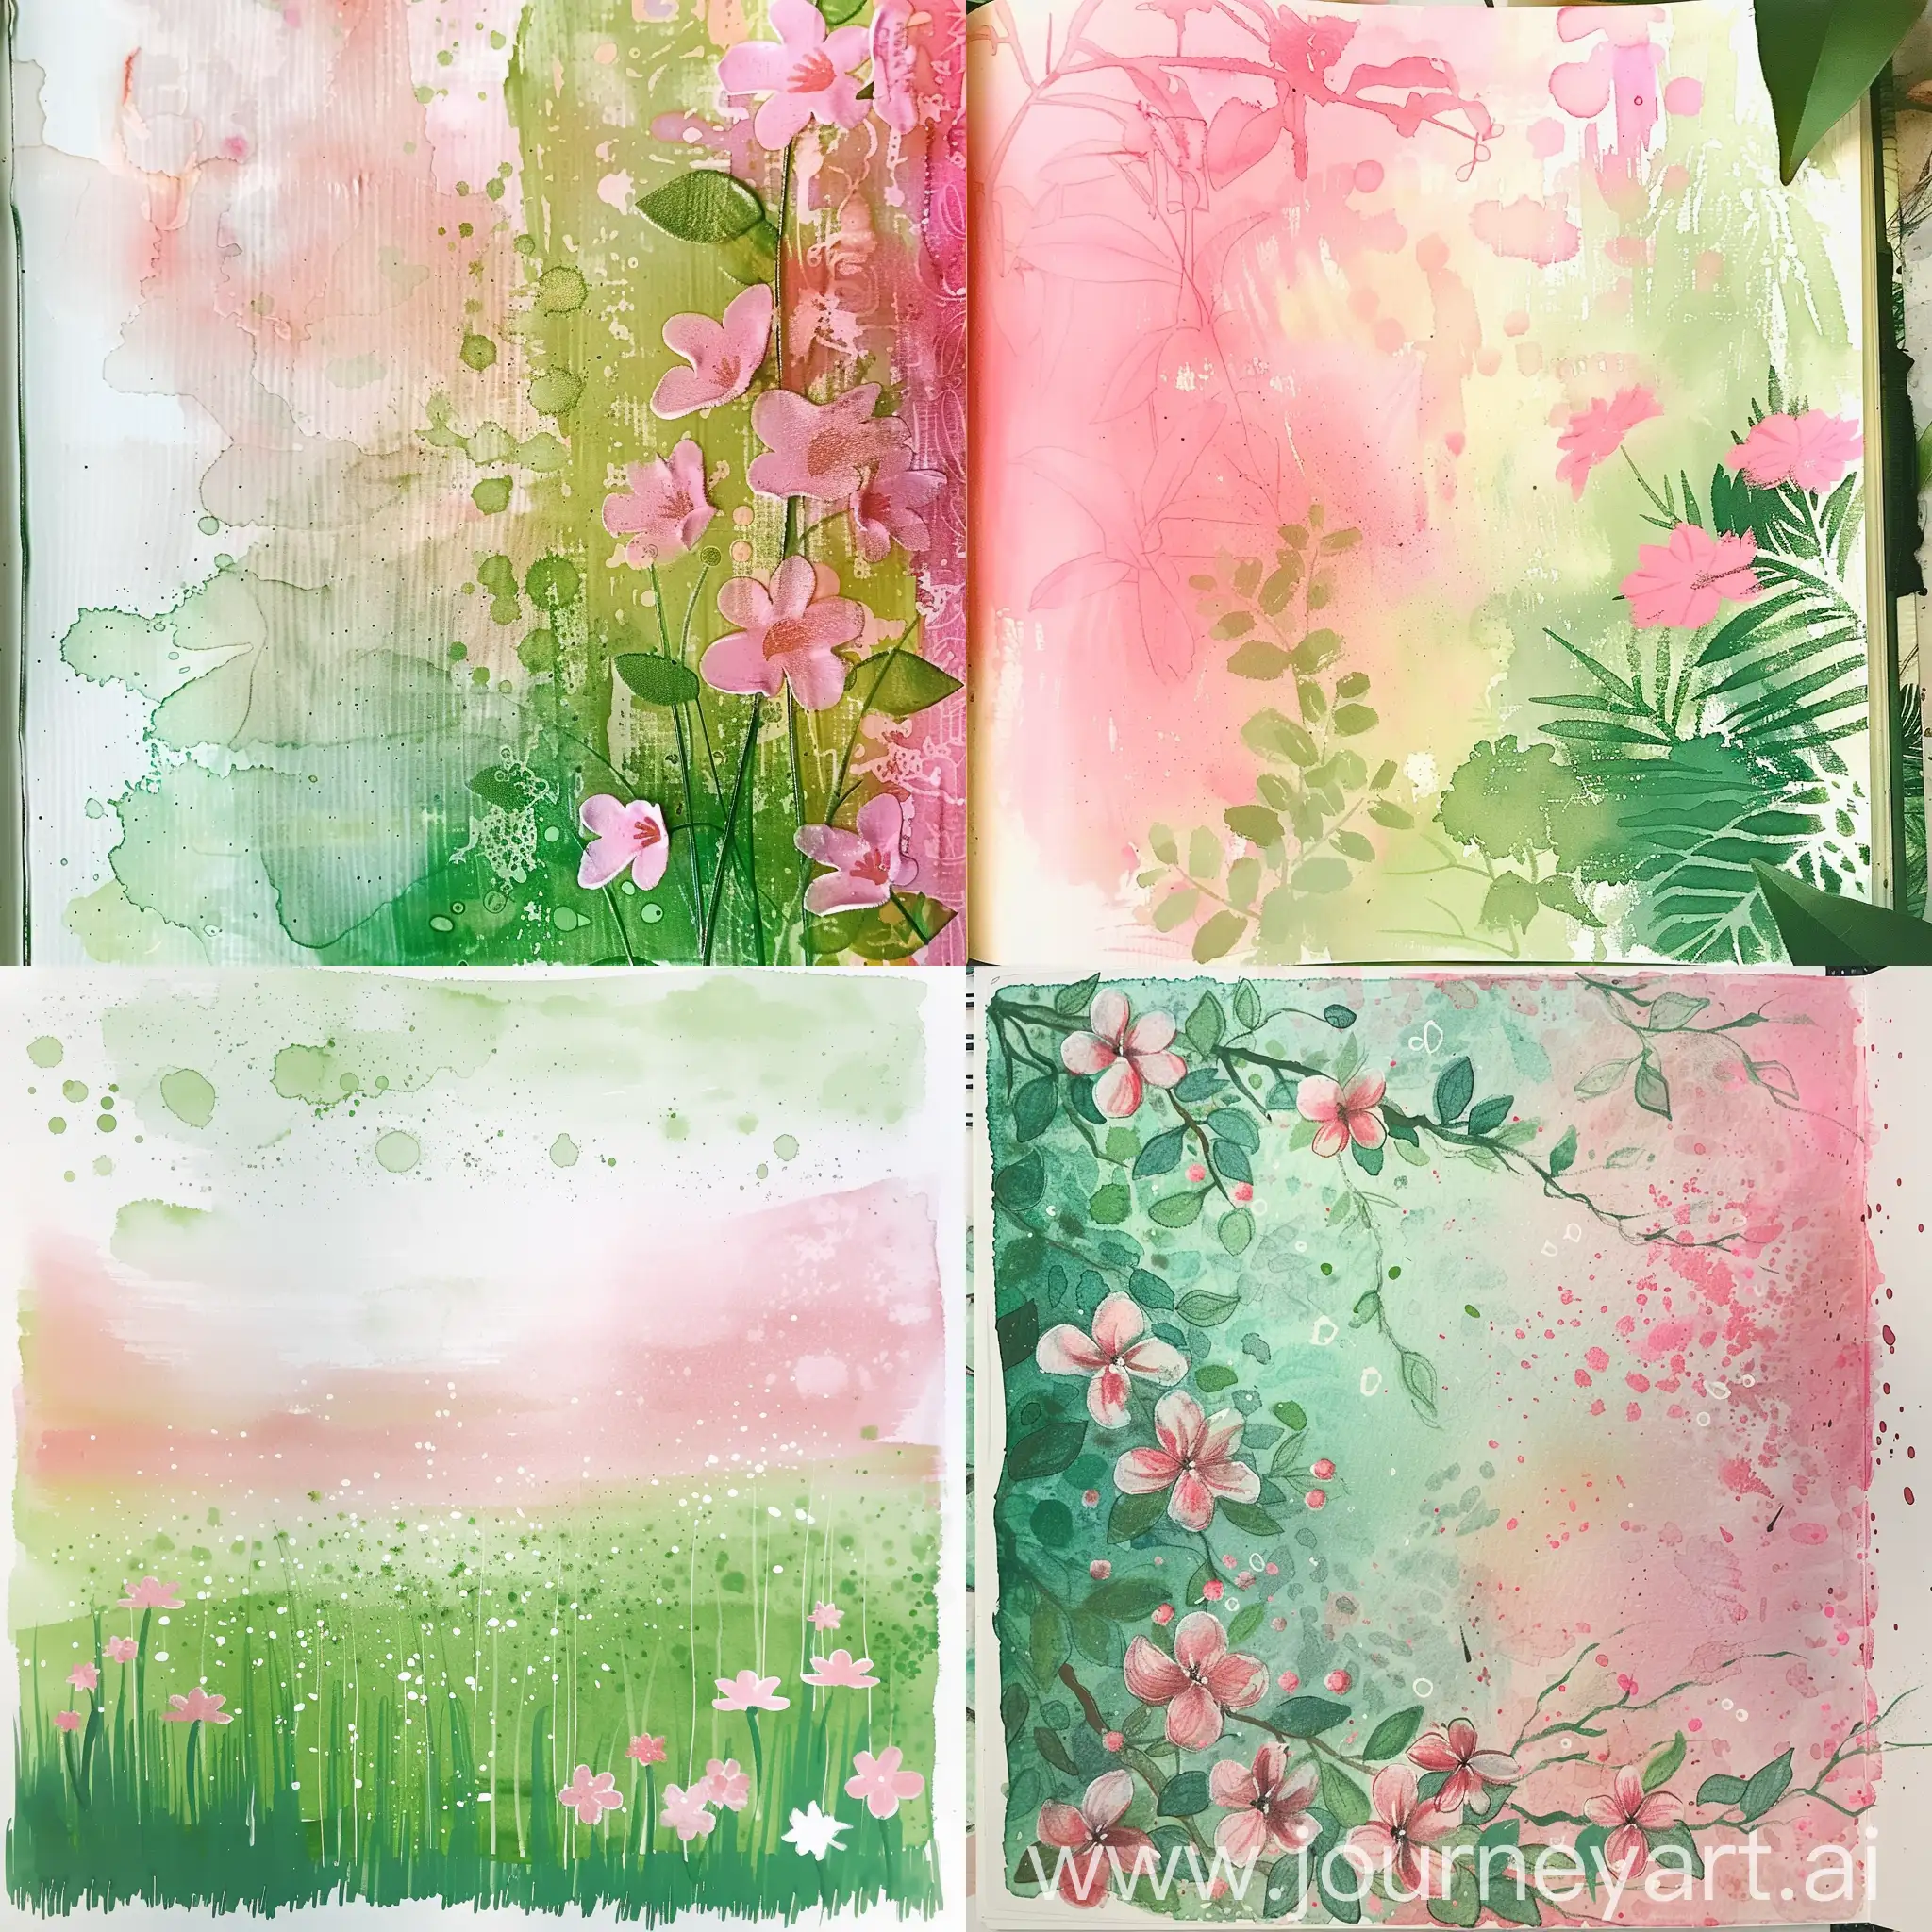 A page painted with gradient technique and using spring green and pink colors.